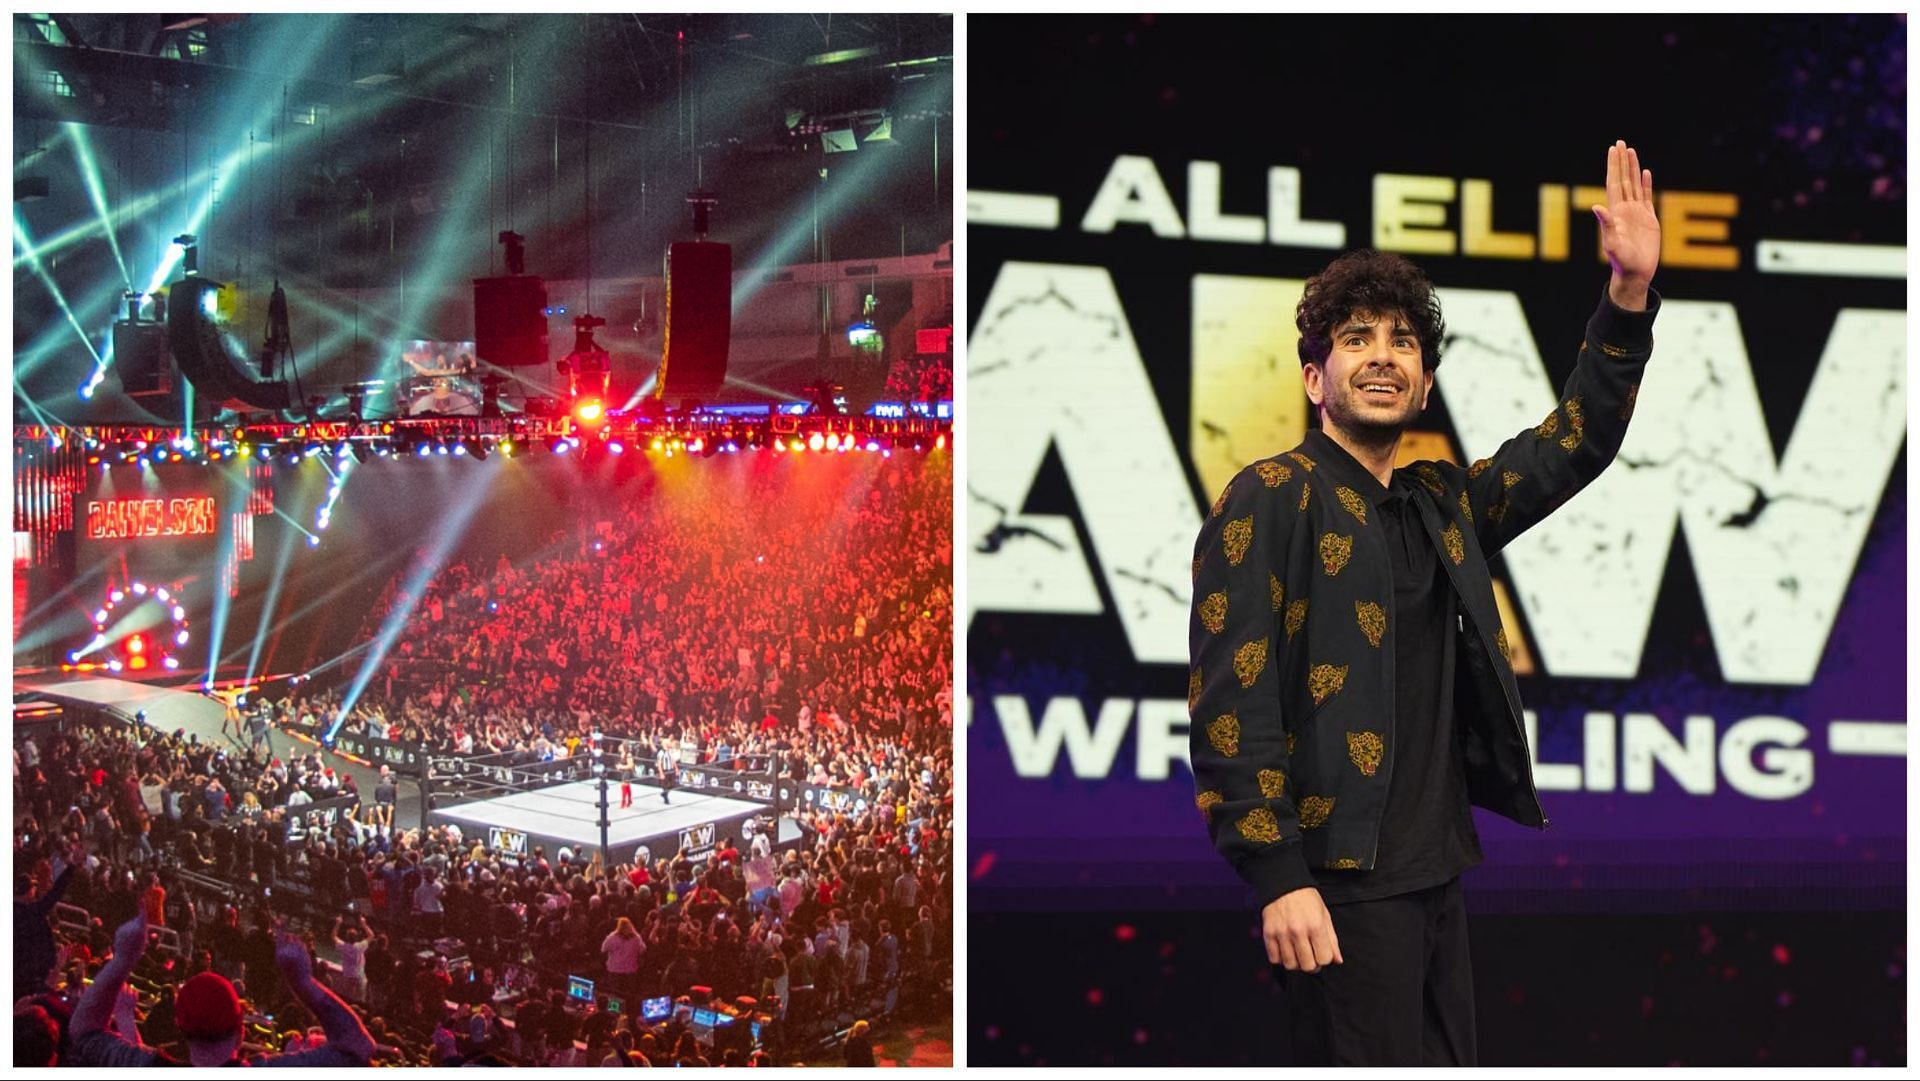 AEW fans pack arena for Dynamite, Tony Khan waves in front of the AEW logo